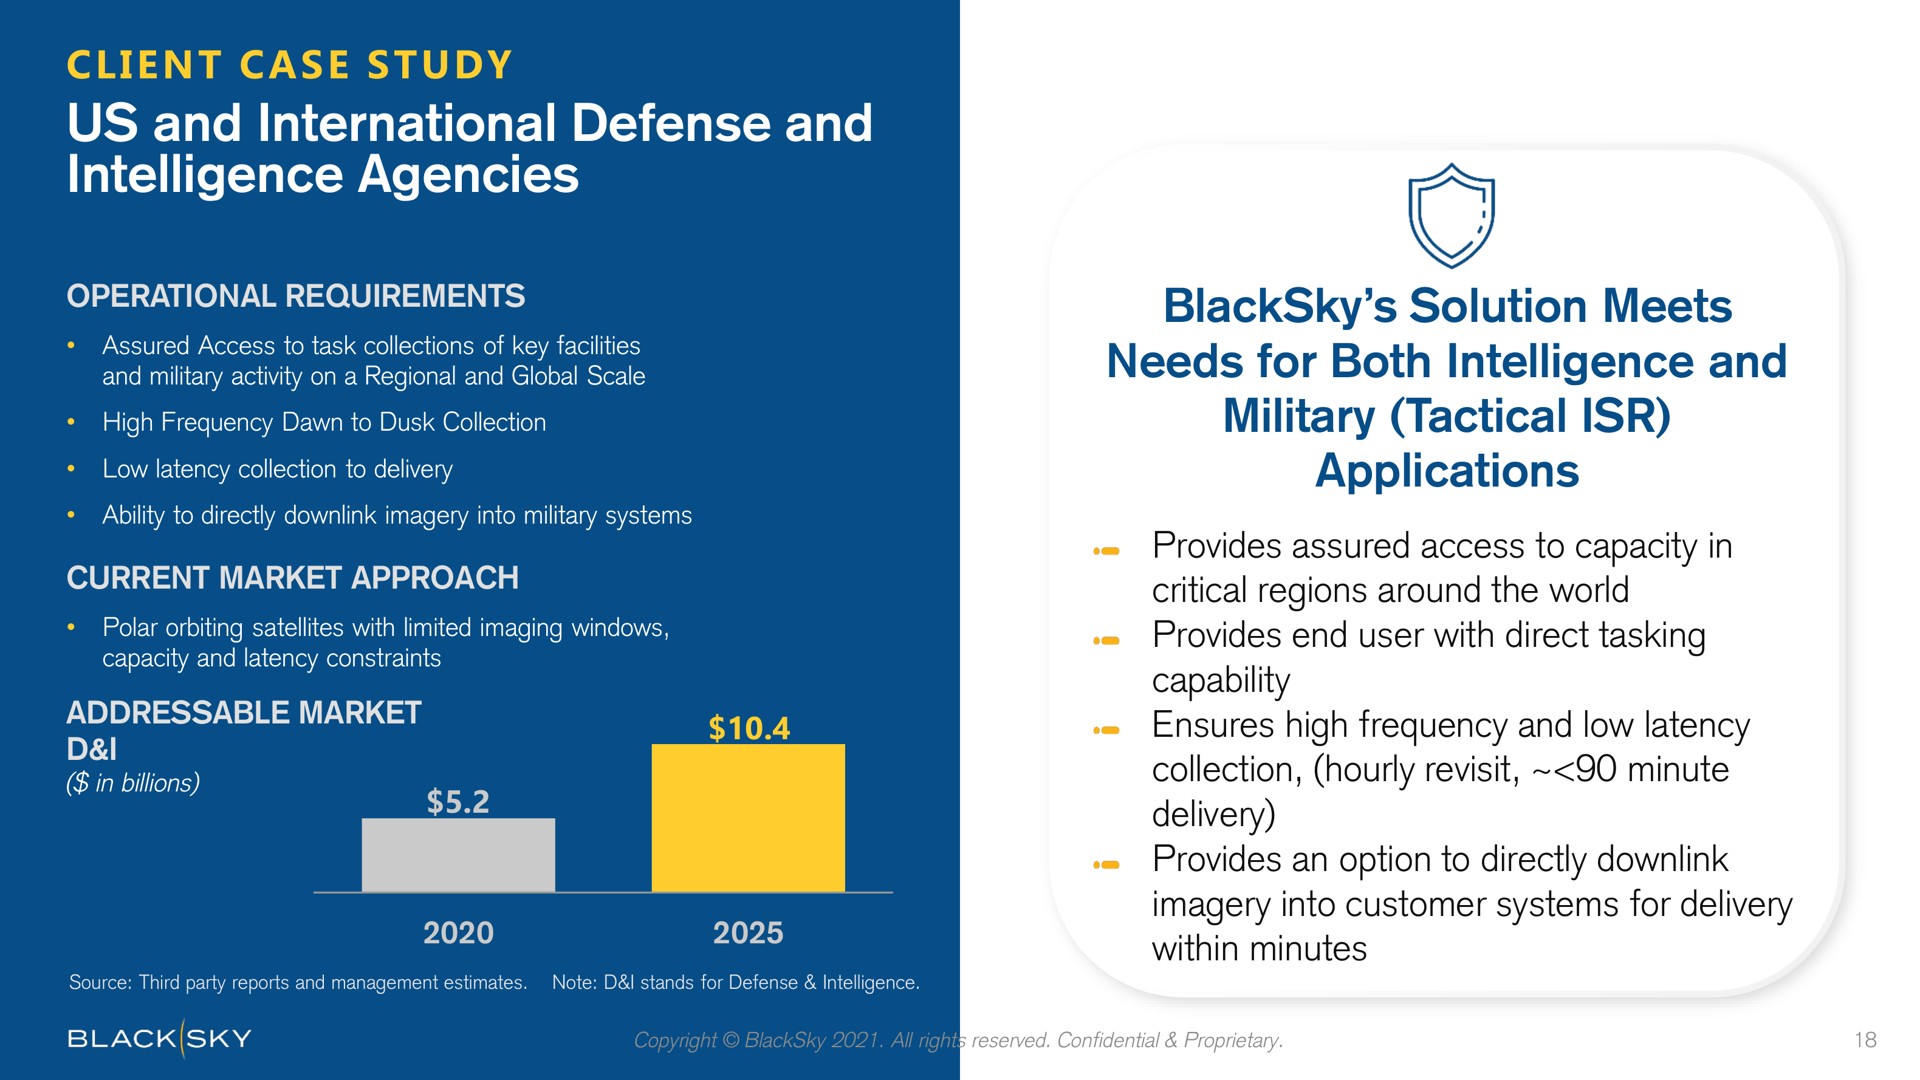 us and international defense and intelligence agencies solution meets needs for both intelligence and military tactical applications | BlackSky